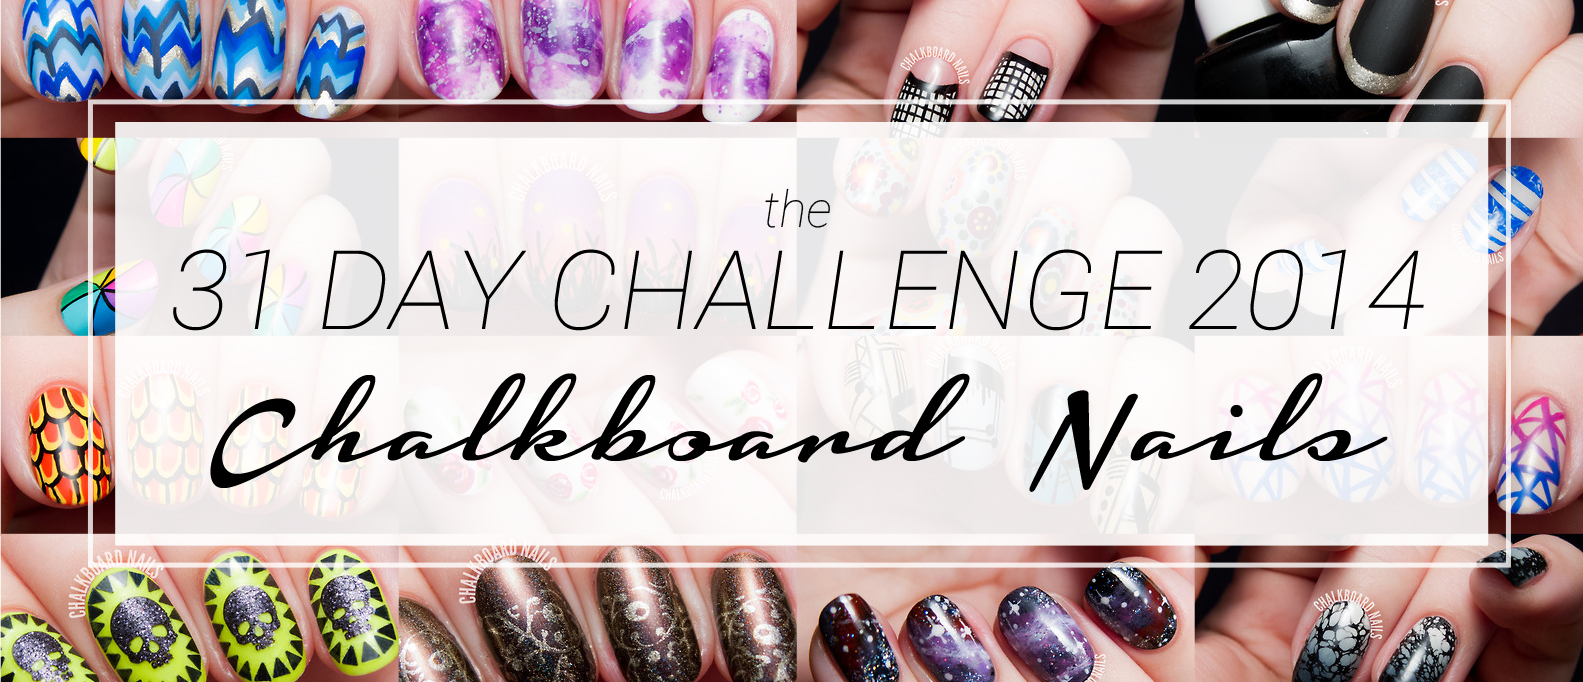 The 31 Day Challenge 2014 Roundup by @chalkboardnails